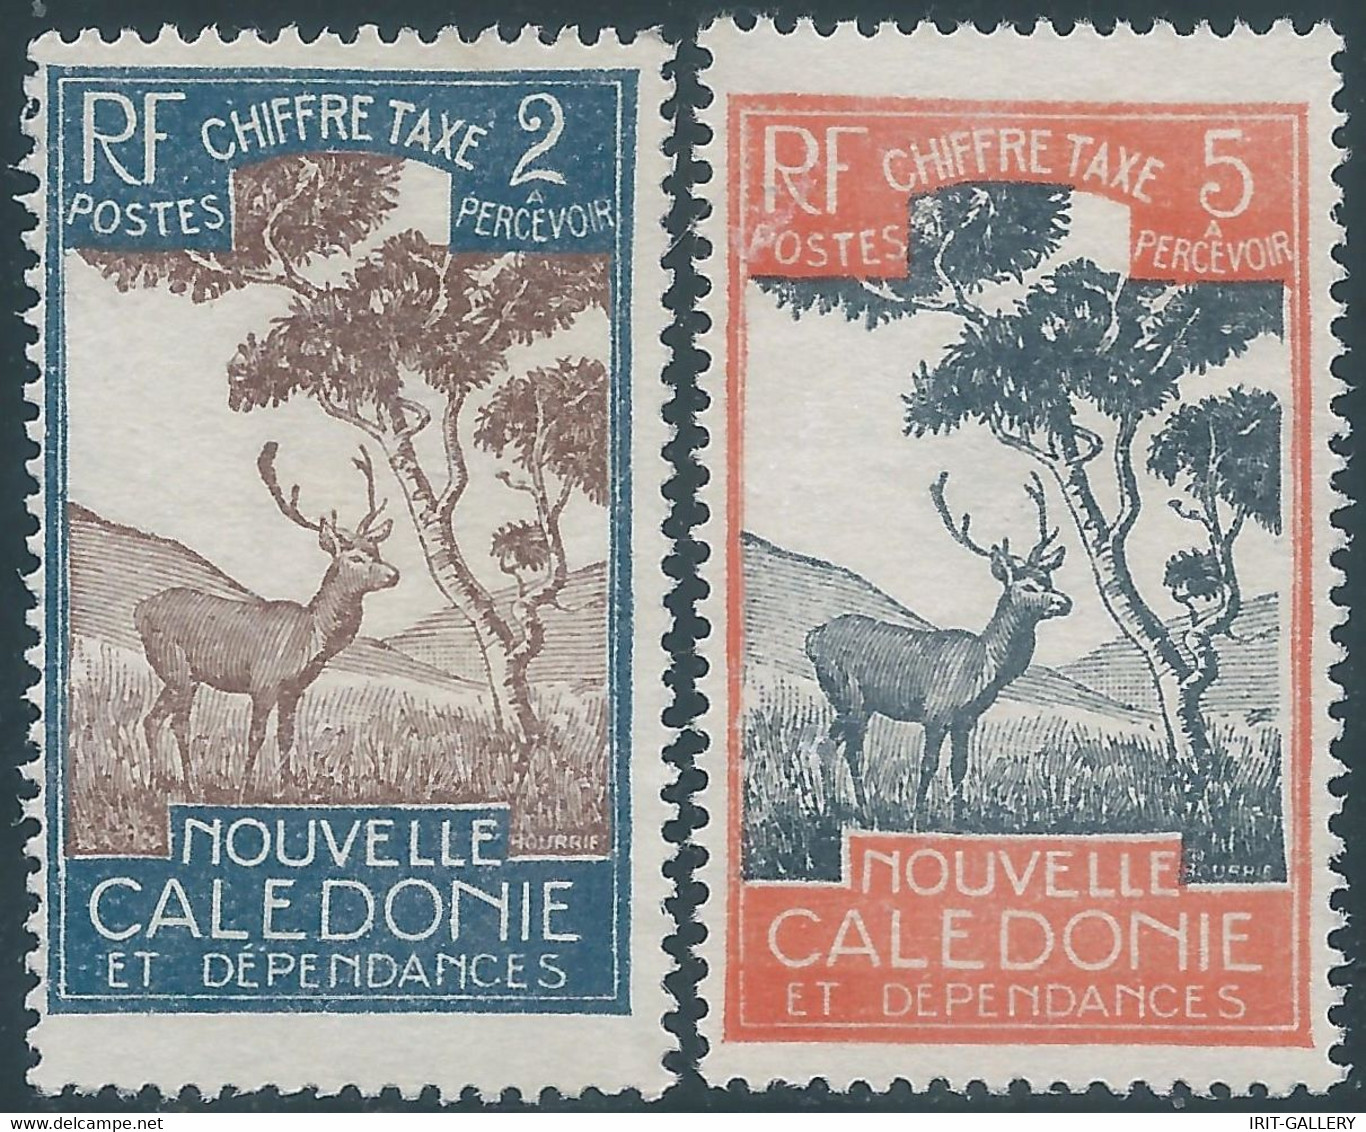 FRANCE,Calédonie - New Caledonia,1920 CHIFFER TAXE,Revenue Stamps Fiscal Tax,2 & 5F,Mint - Postage Due